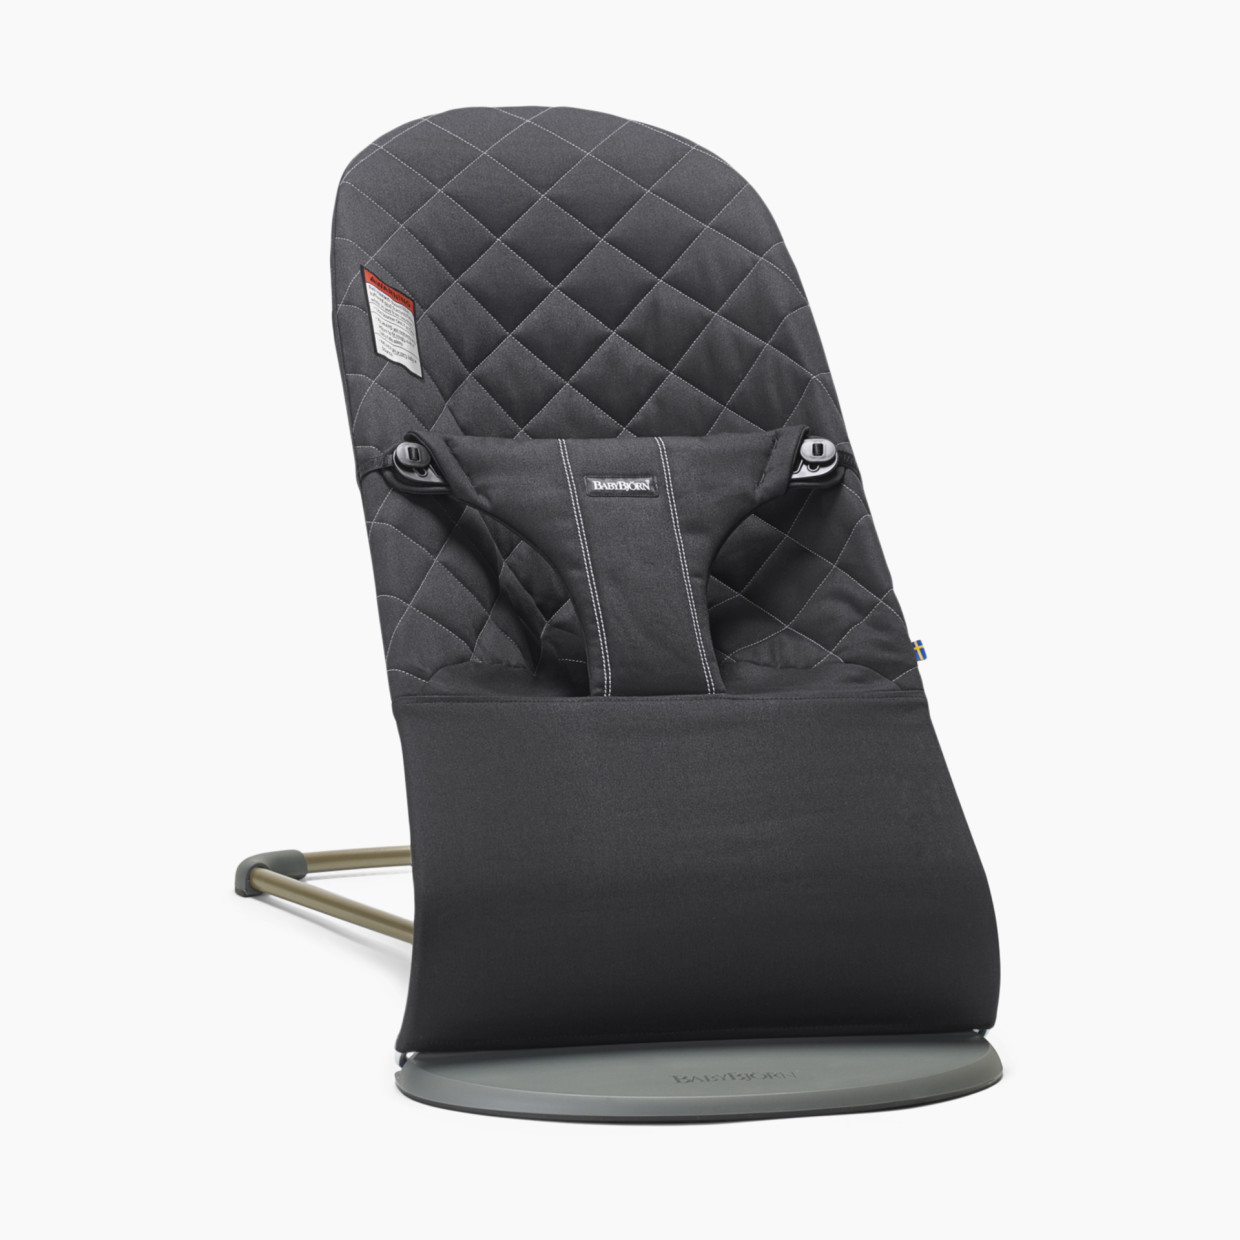 Babybjörn Bouncer Bliss - Black Quilted Cotton/Dark Gray Frame (2017).